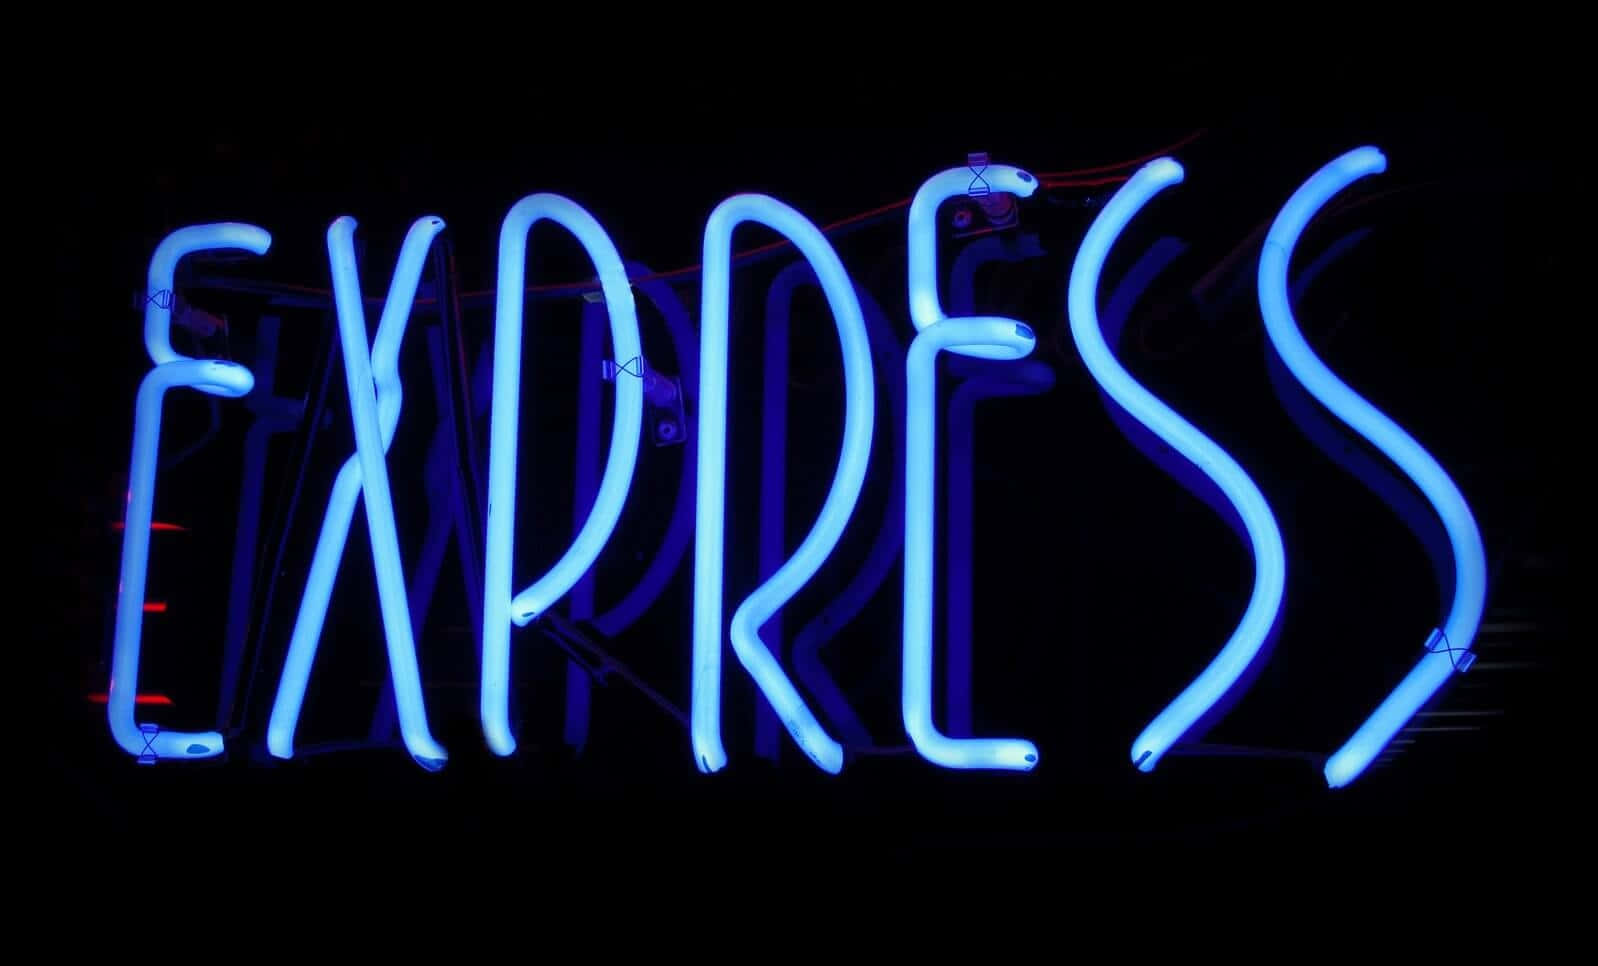 Electric Blue Neon Sign Express Wallpaper